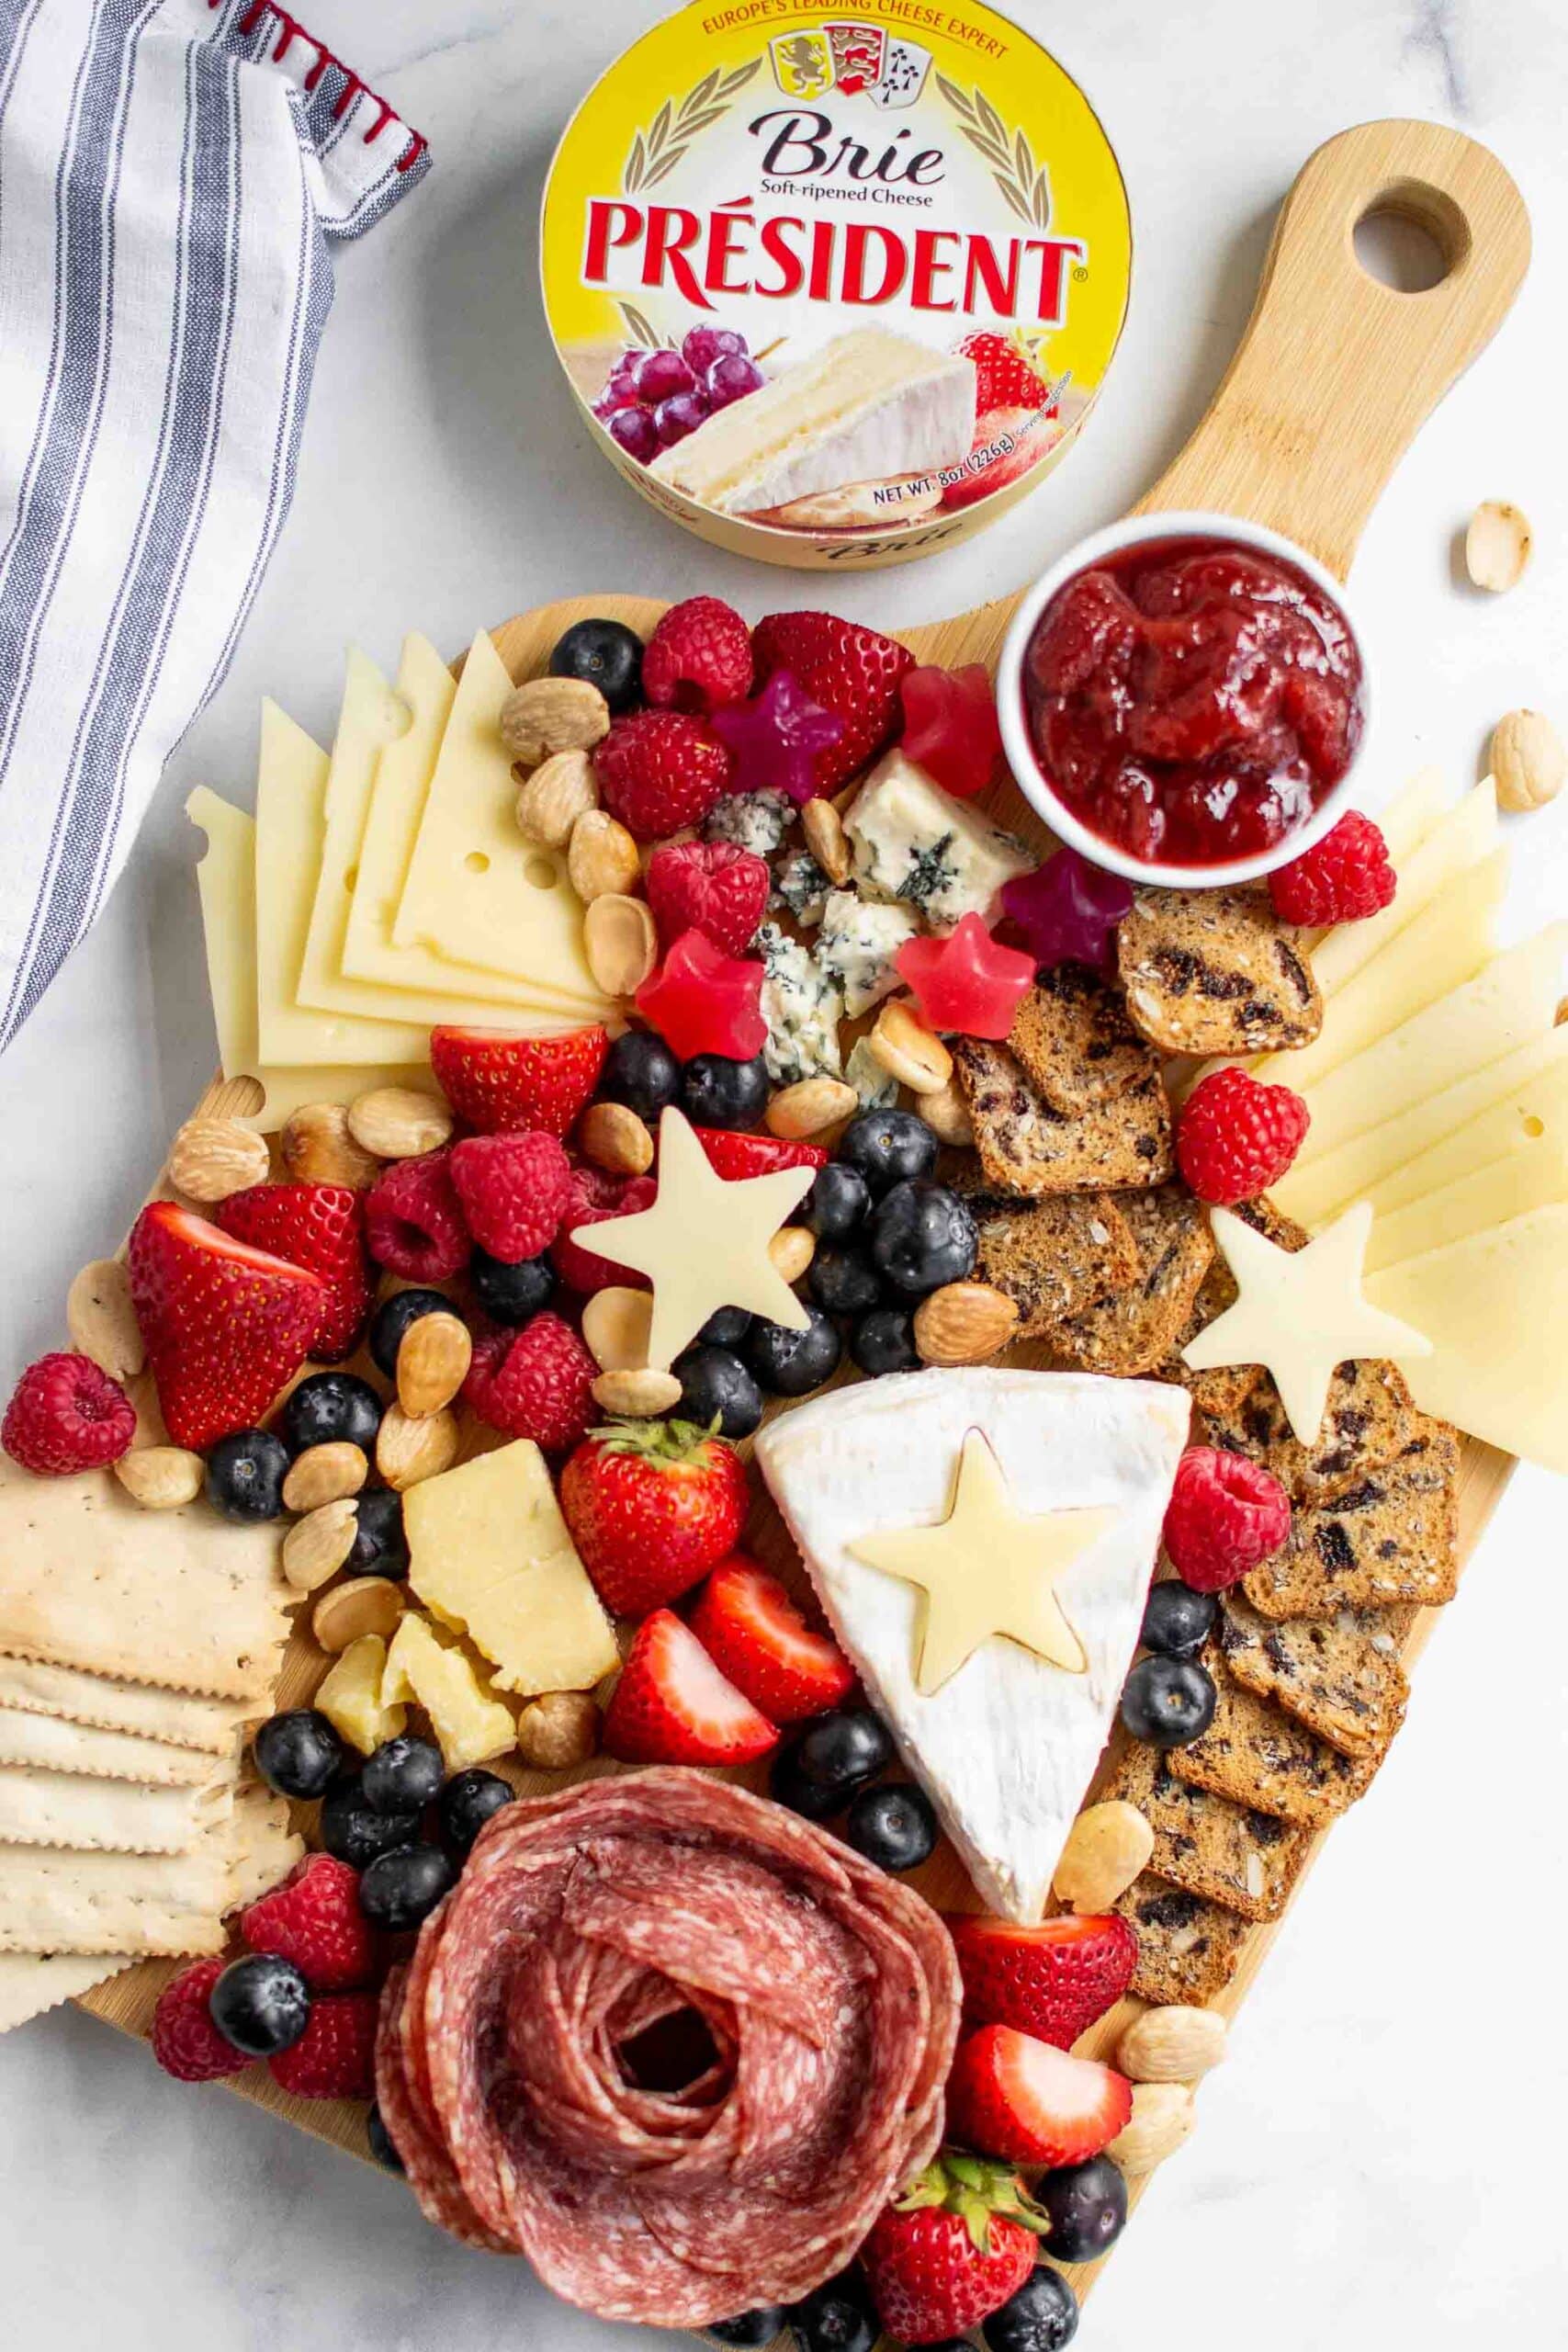 Red white and blue colored Patriotic Charcuterie Board with Président Brie container.